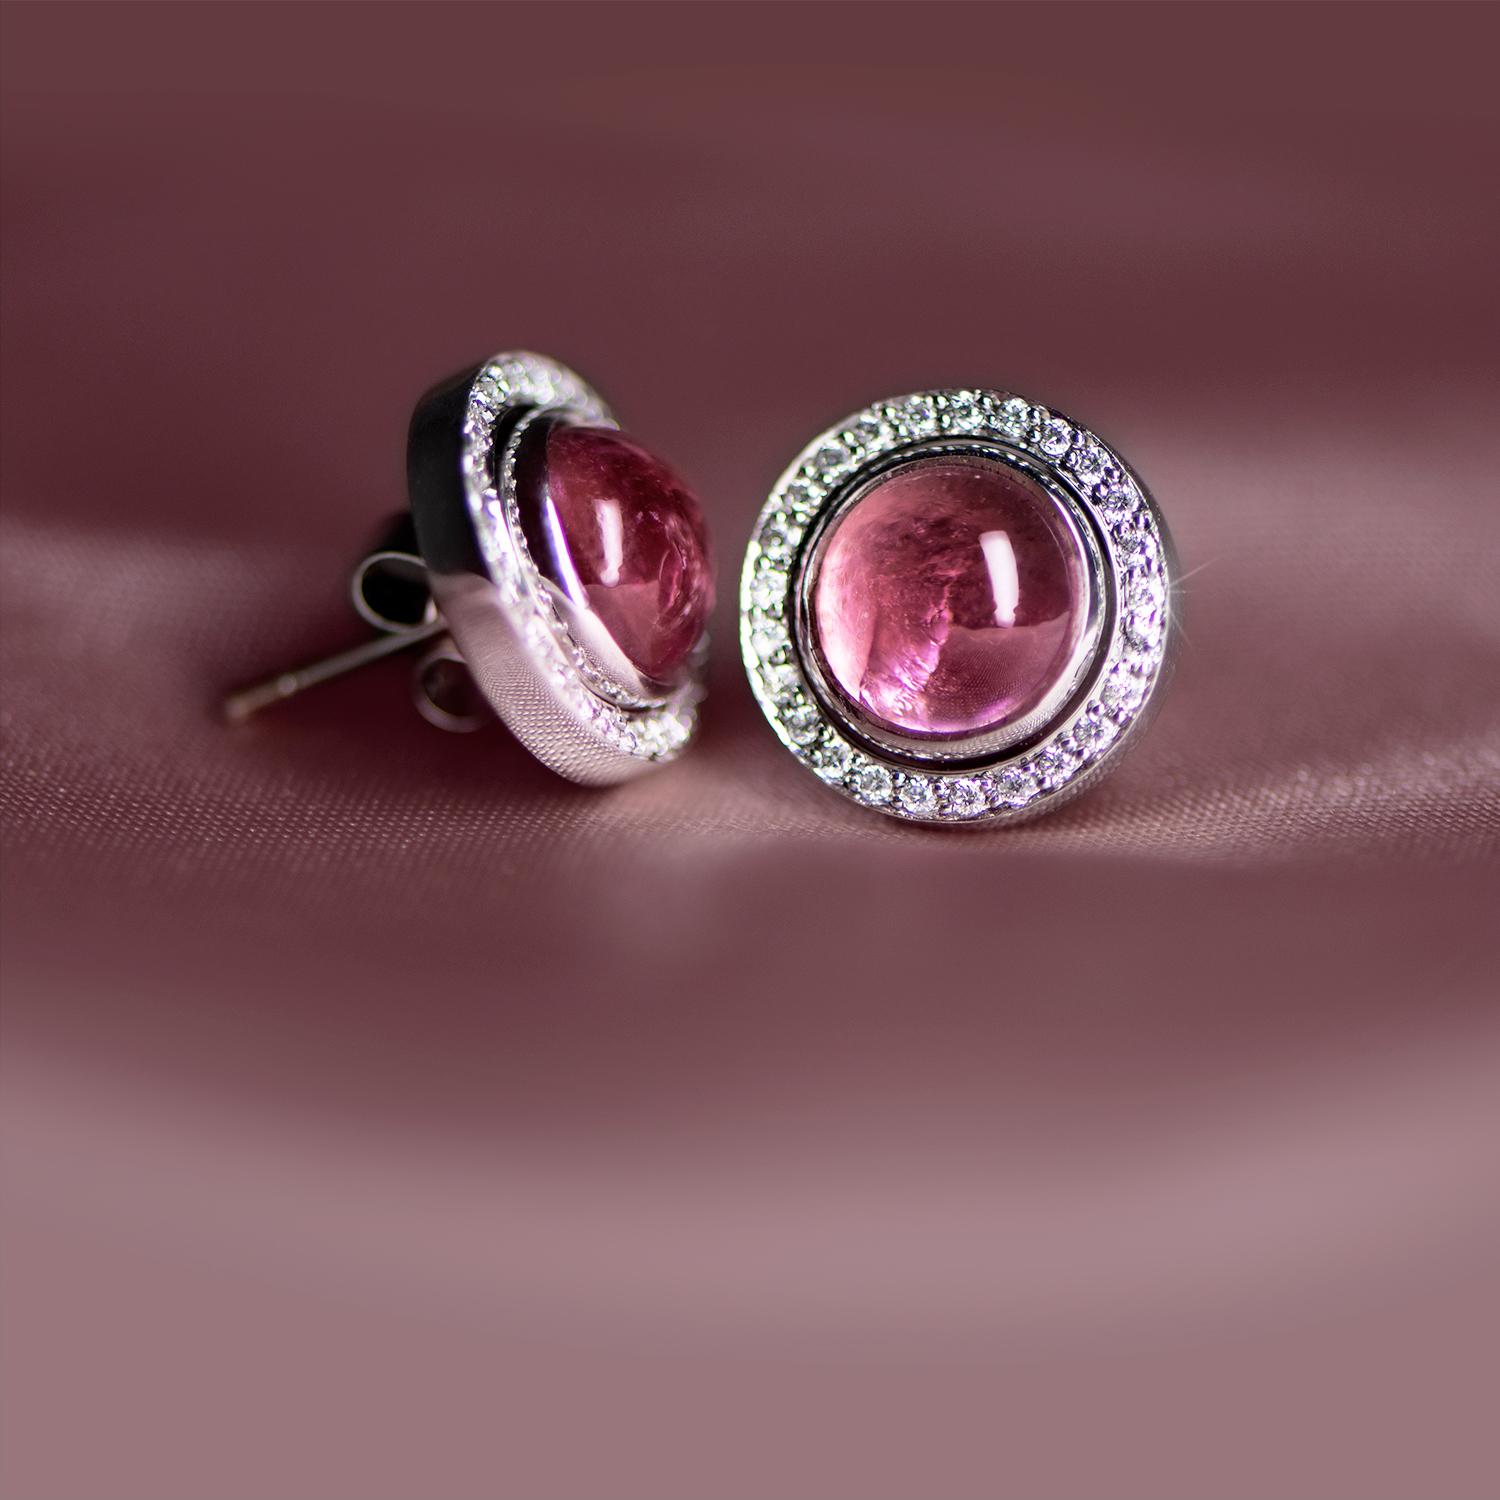 These Pink Tourmaline Cabochon and Diamond stud earrings are really versatile as the diamond surround can be removed to reveal only the pink tourmaline cabochon stud earrings. One discreet option for day wear and a dazzling evening option. All with